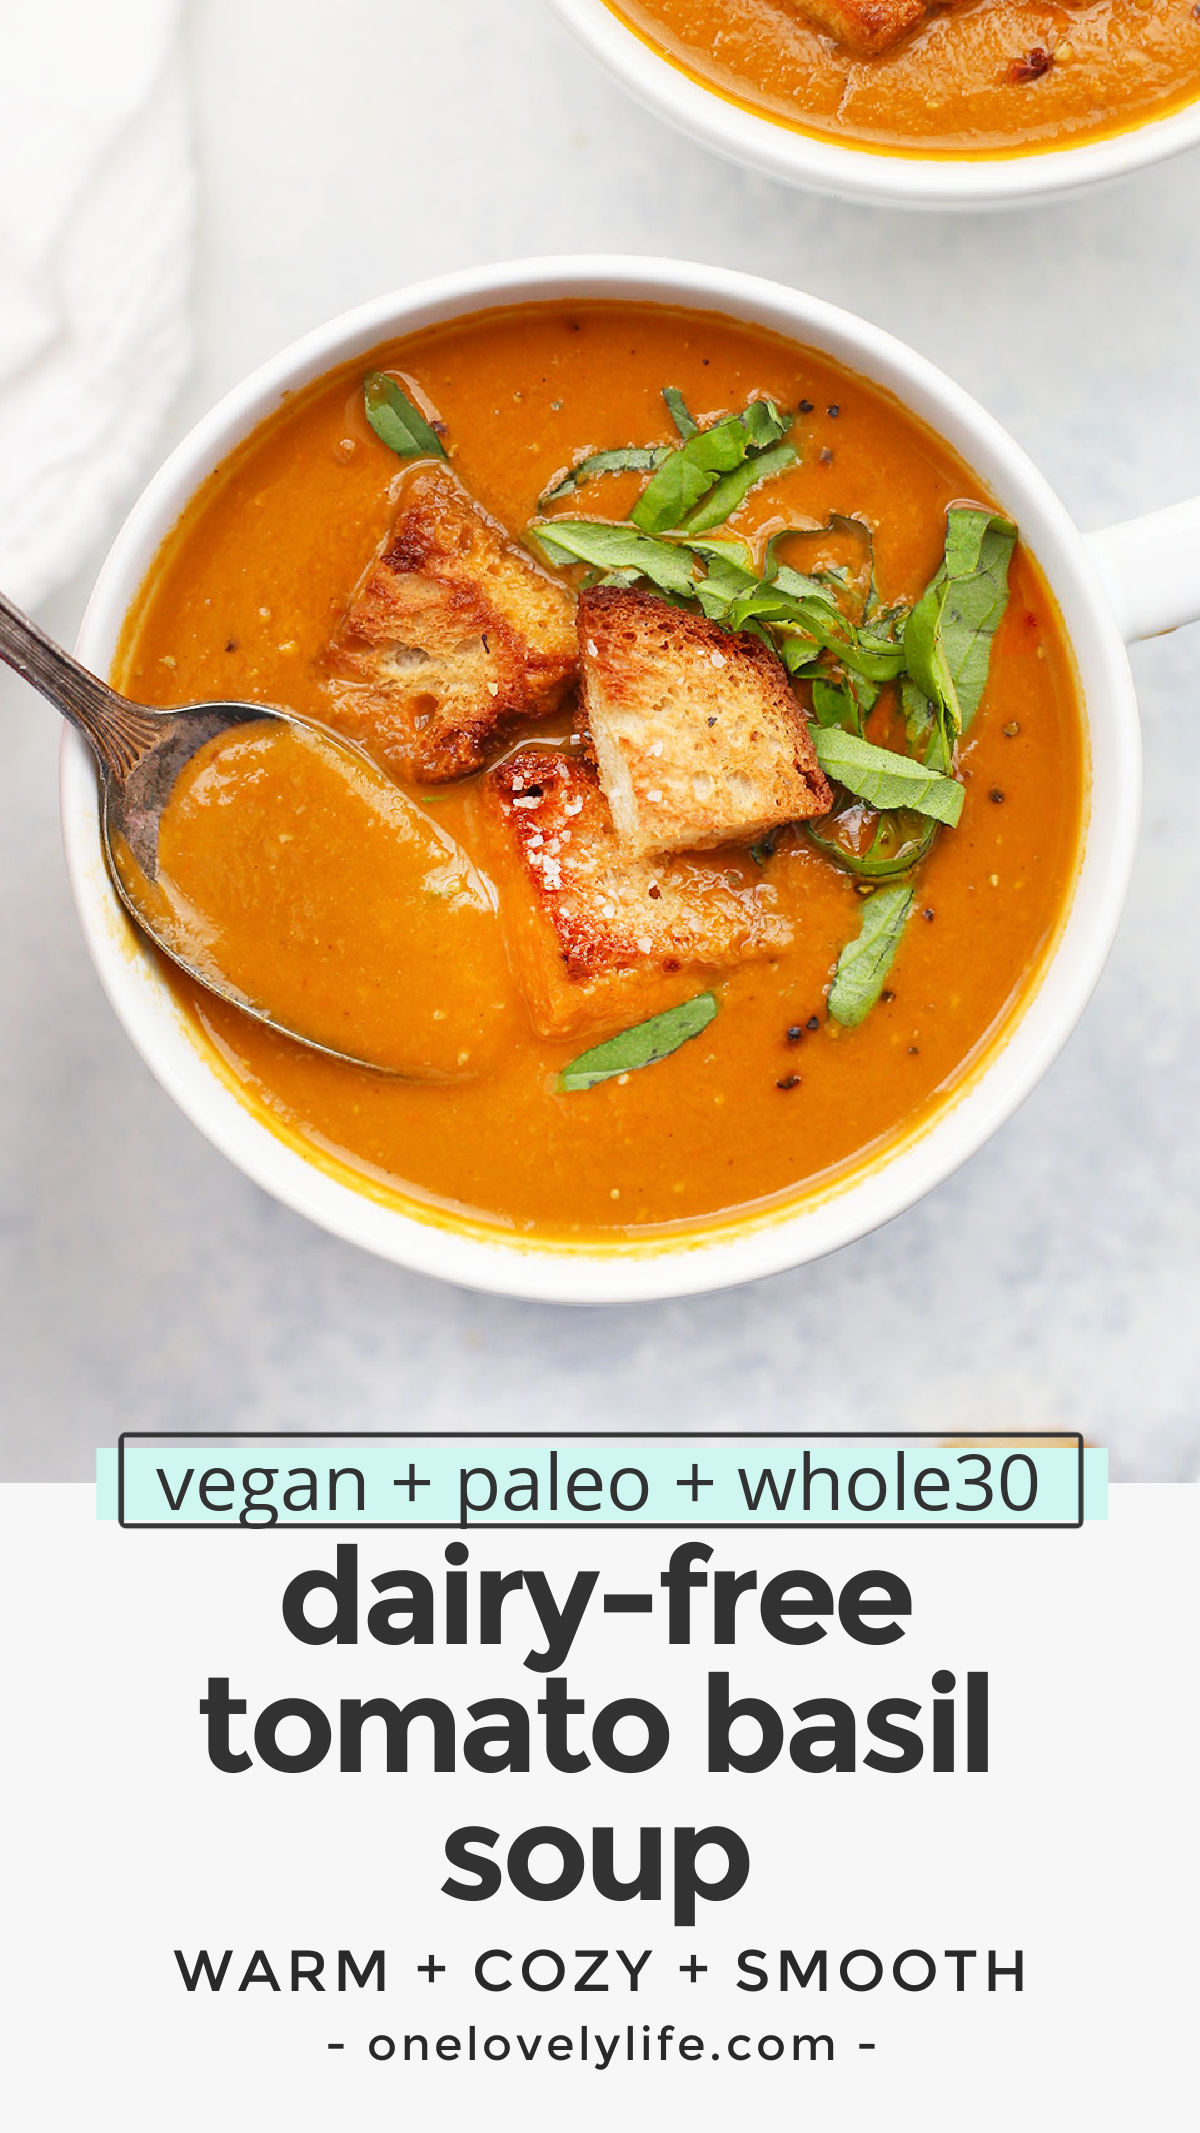 Creamy Tomato Basil Soup - You'd never guess that this creamy tomato soup is 100% vegan. It's full of deep, rich tomato basil flavor and a gorgeous velvety texture you'll fall for over and over again. (Vegan & Paleo) // Roasted Tomato Basil Soup Recipe // Paleo Tomato Basil Soup // Vegan Tomato Basil Soup #tomatosoup #vegan #paleo #dairyfree